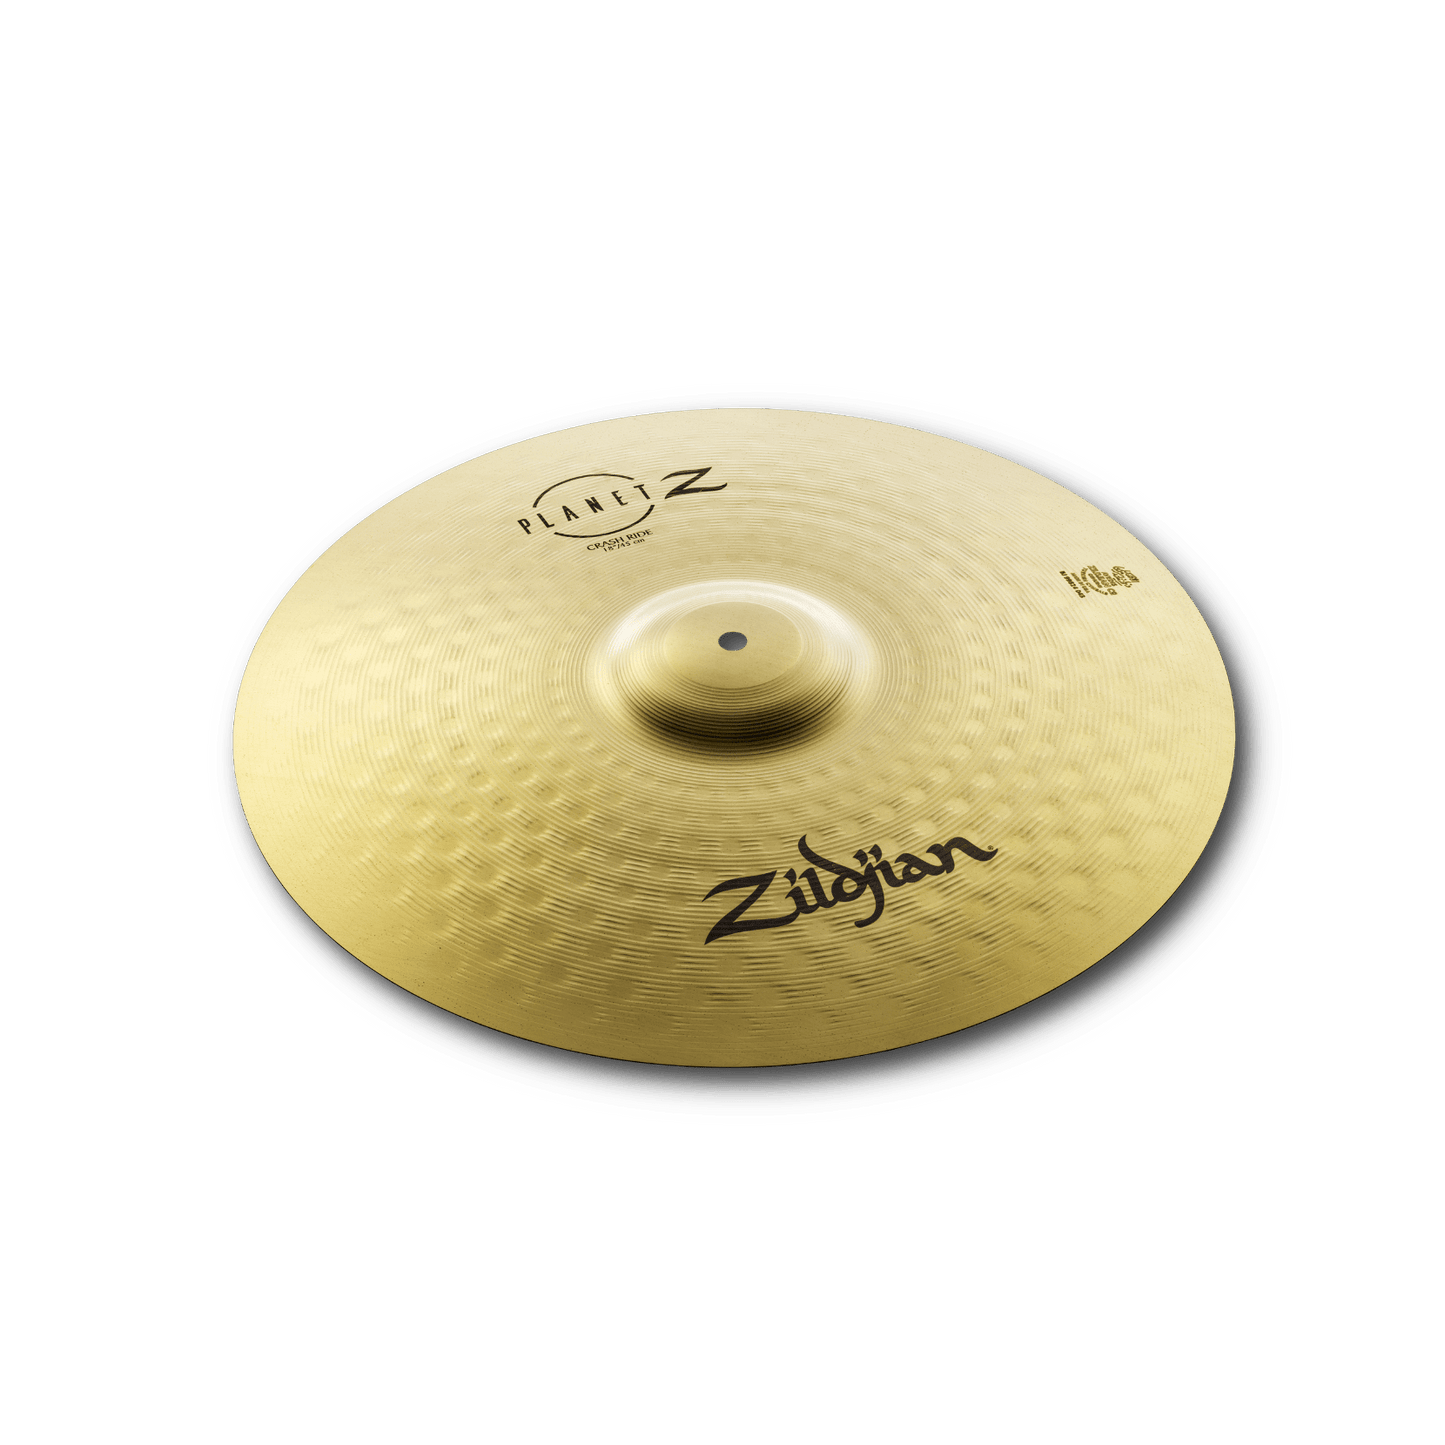 Planet Z Fundamentals Cymbal Pack